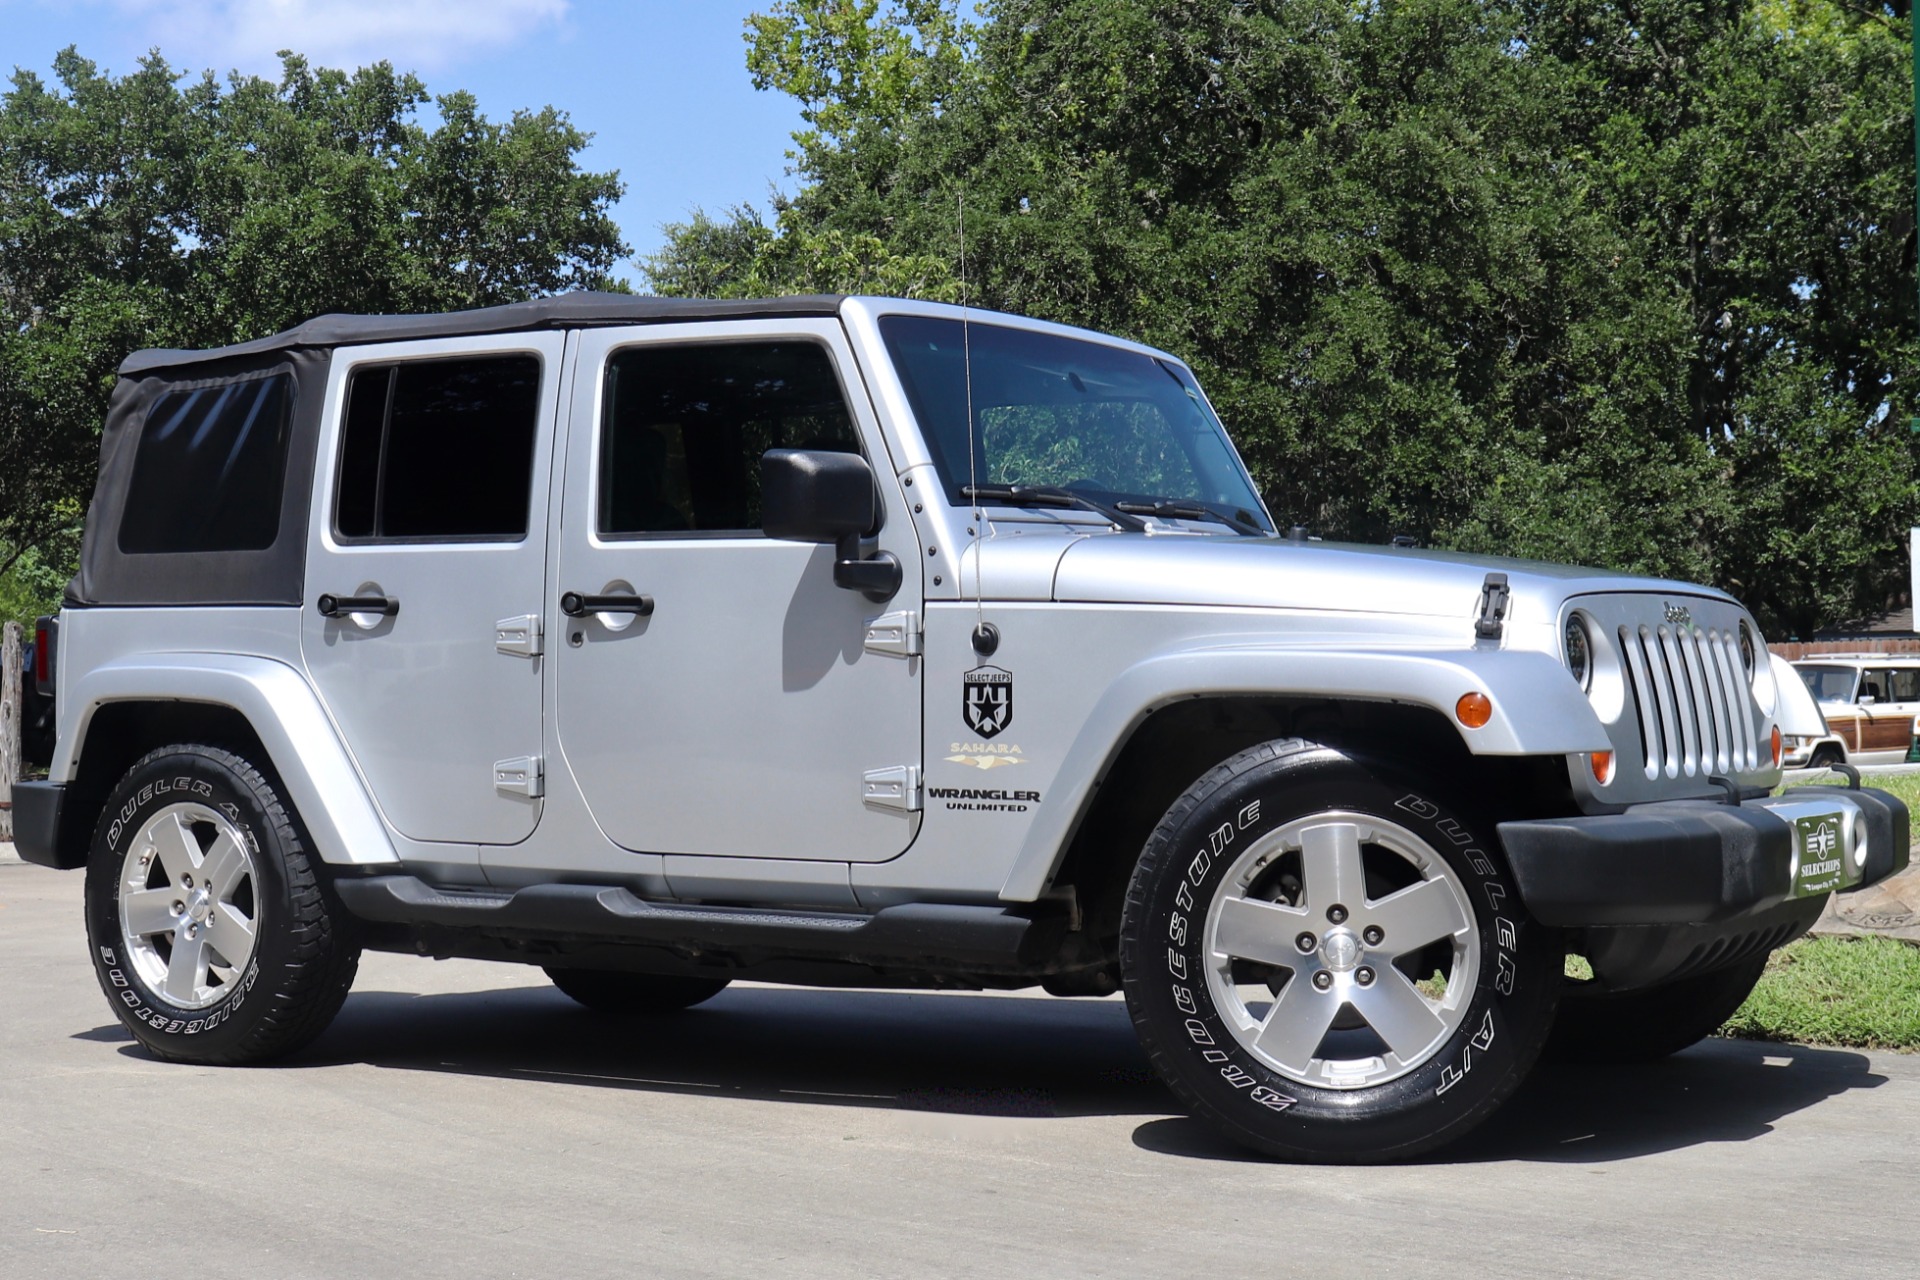 Used 2008 Jeep Wrangler Unlimited Sahara For Sale ($18,995) | Select Jeeps  Inc. Stock #619994